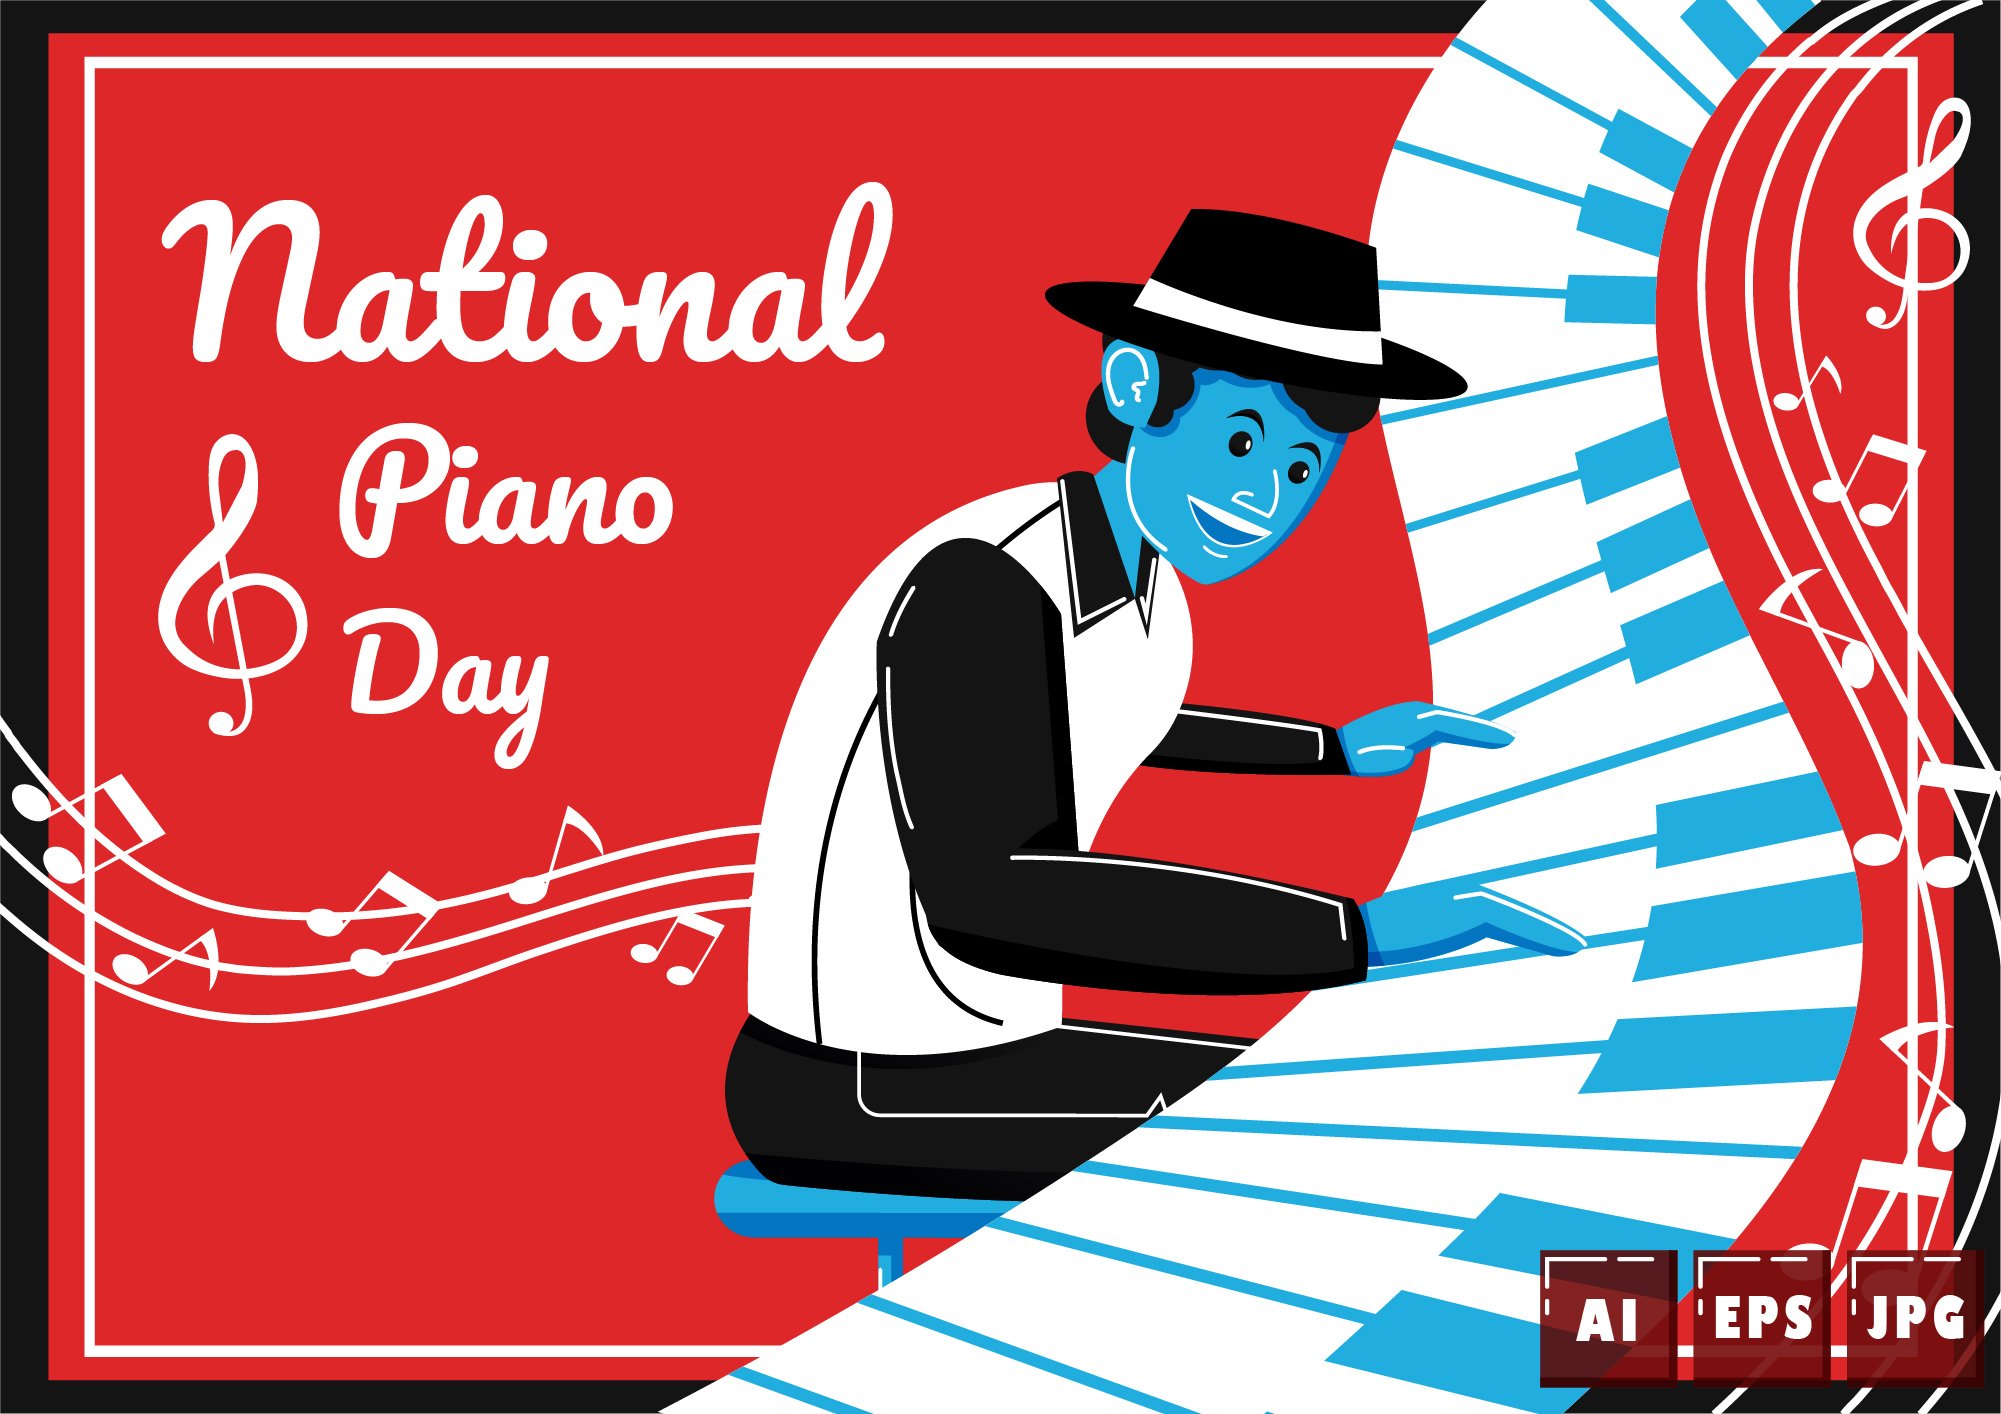 National Piano Day cover image.